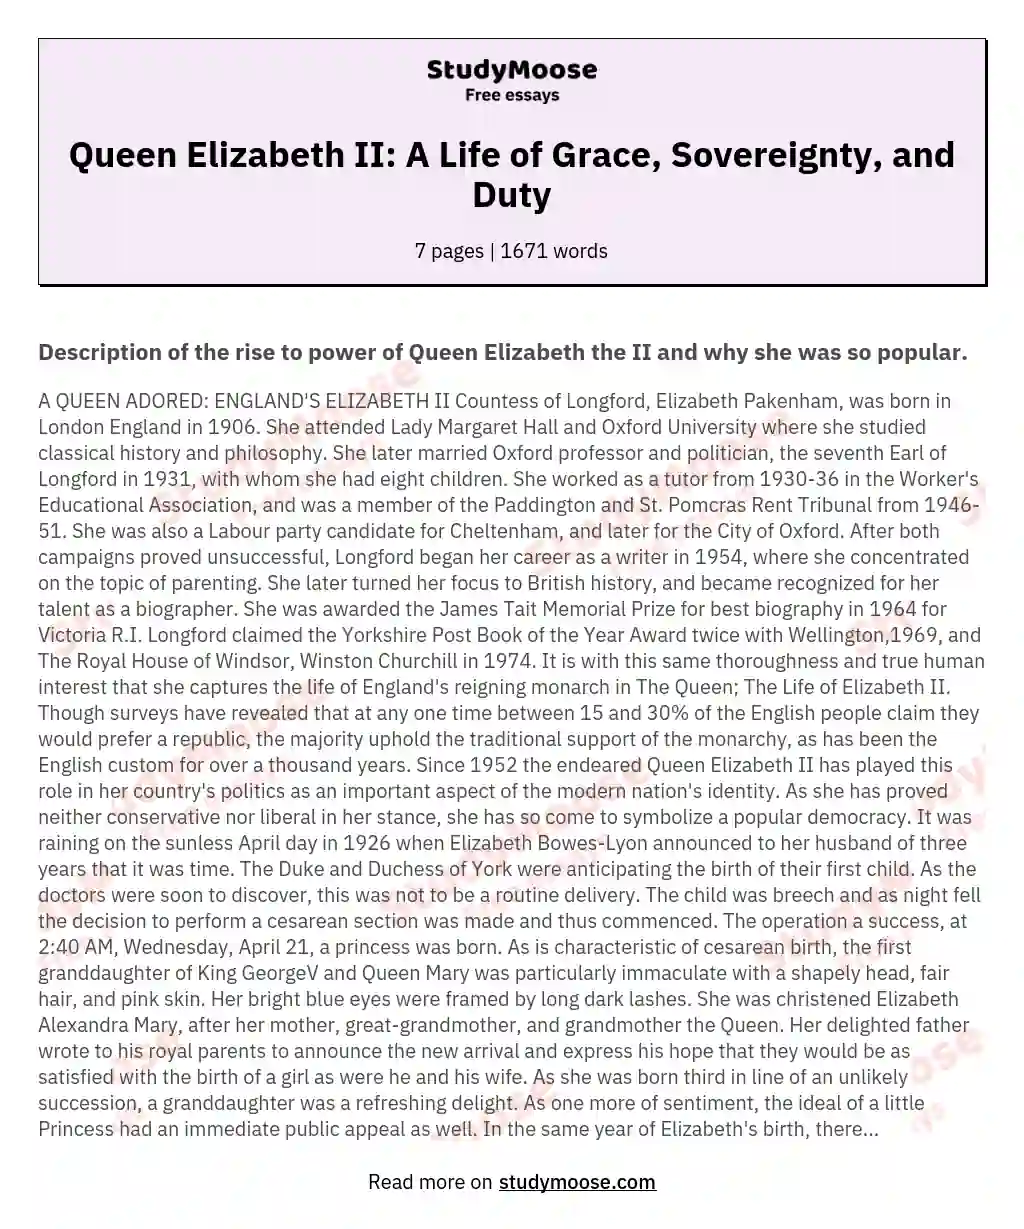 Queen Elizabeth II: A Life of Grace, Sovereignty, and Duty essay